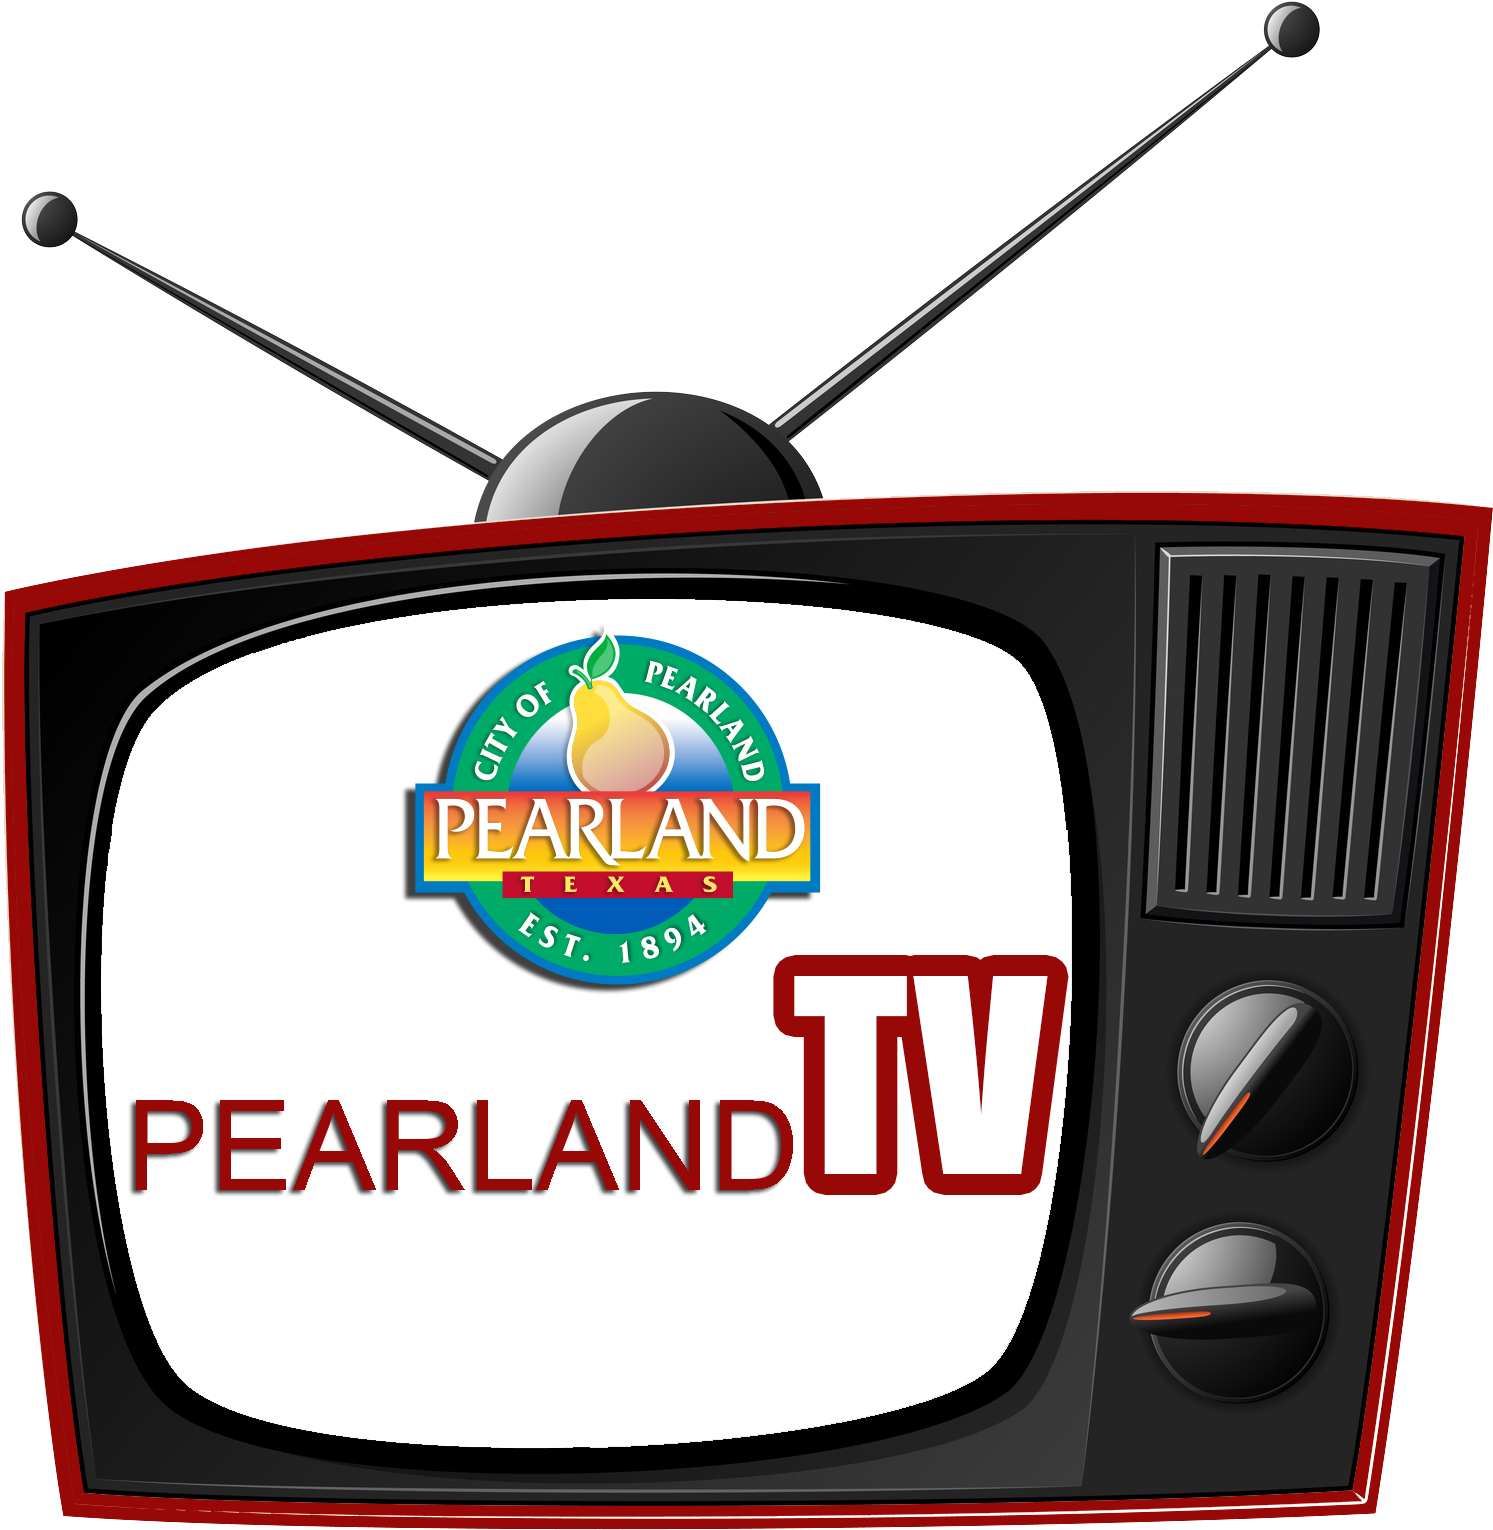 City Of Pearland Tx Home All Videos - Old Tv Set (1732x1732)